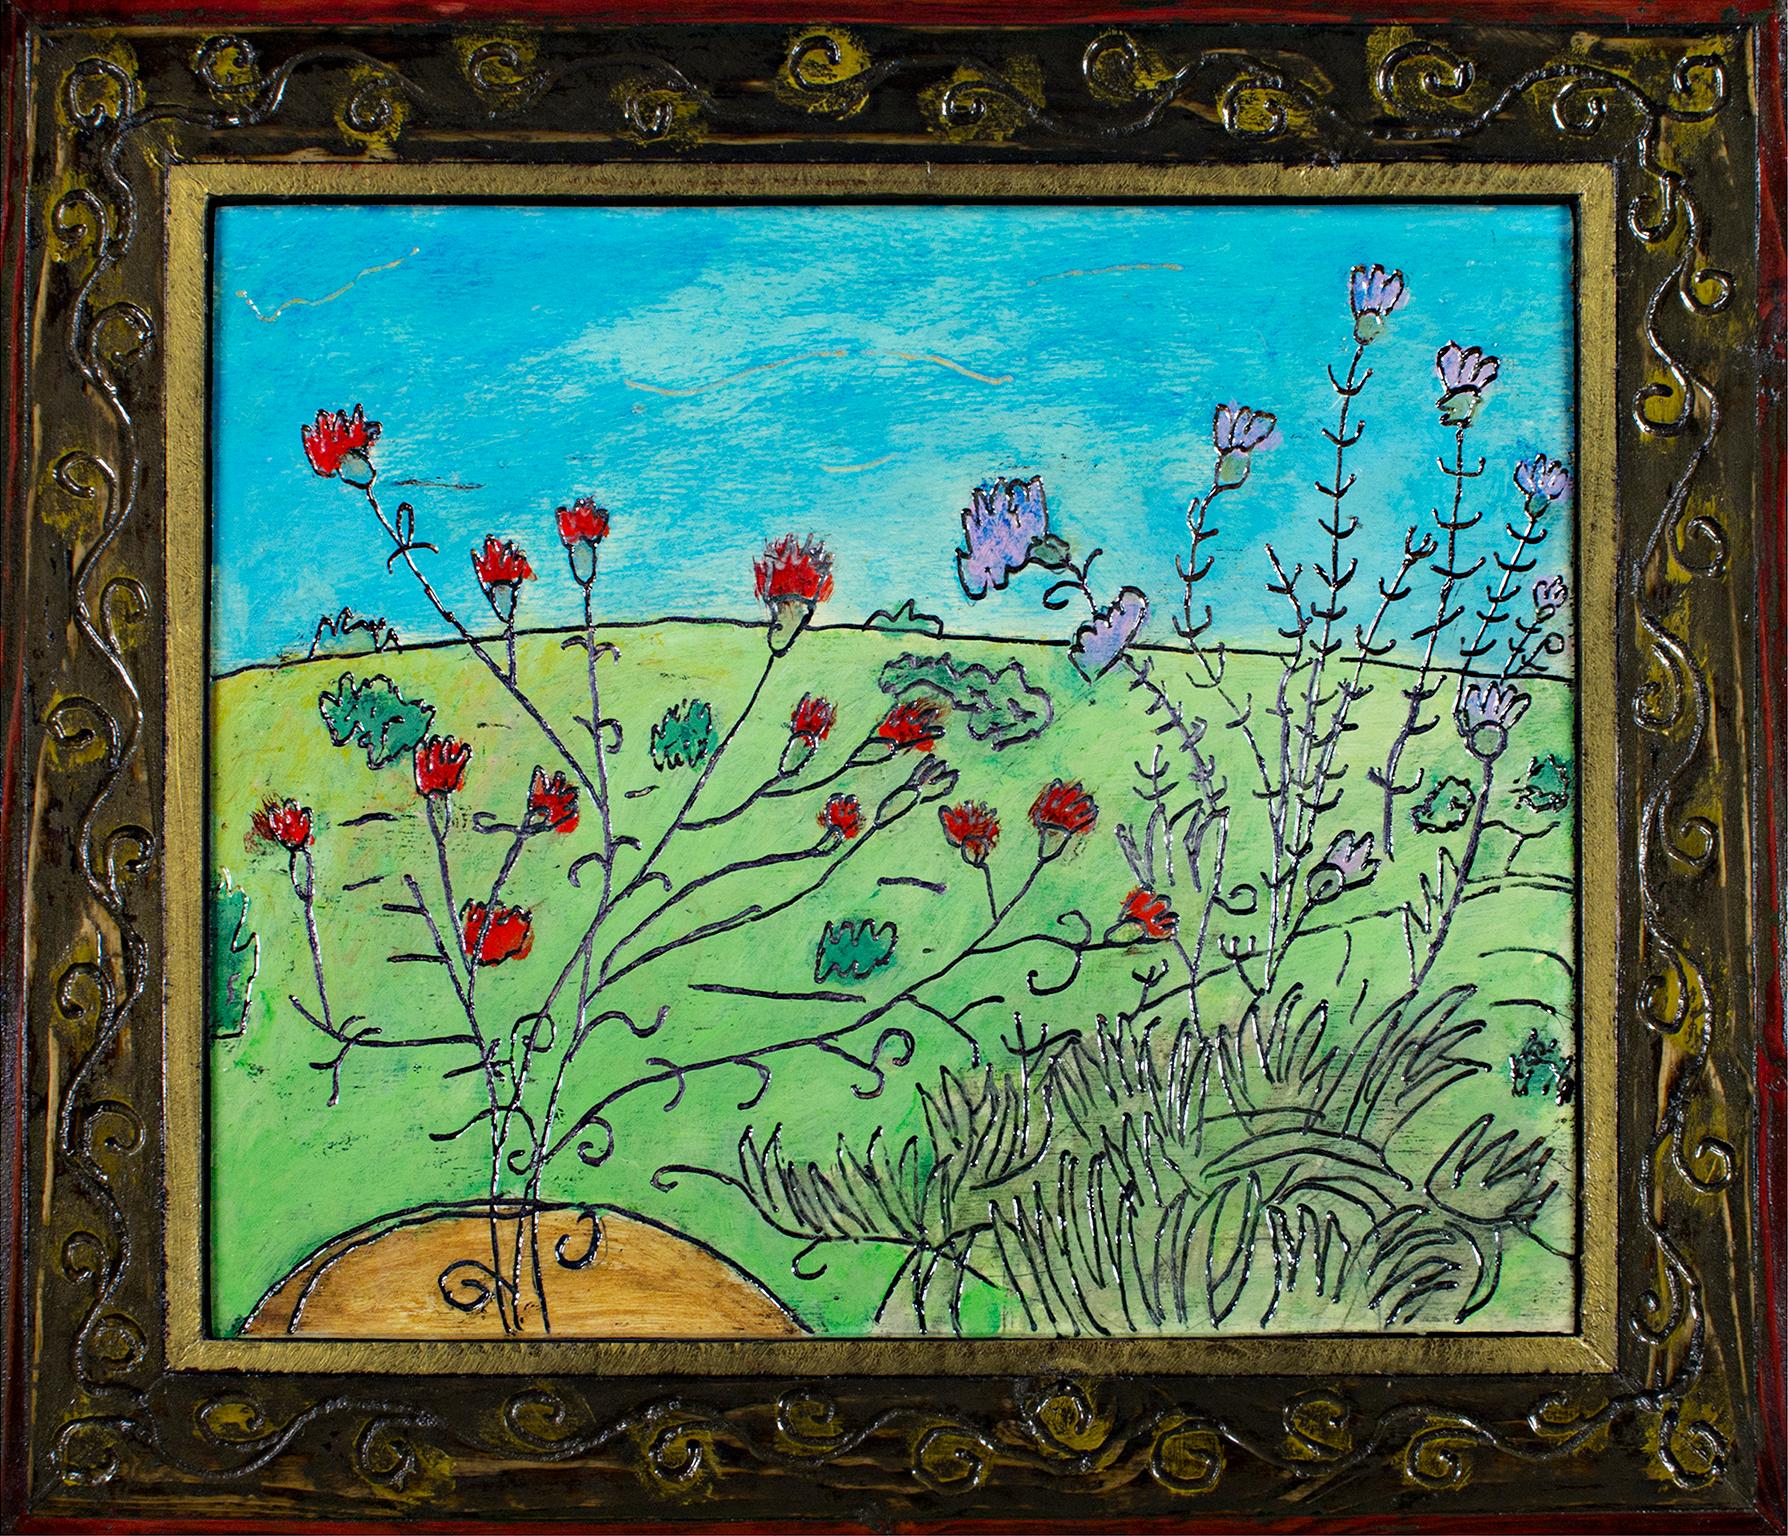 "Deck Flowers" is an original oil painting on wood by Wisconsin artist Robert Richter. It is signed on the back, and the frame is created and hand-carved by the artist,  making it an integral part of the piece. It depicts red flowers growing on